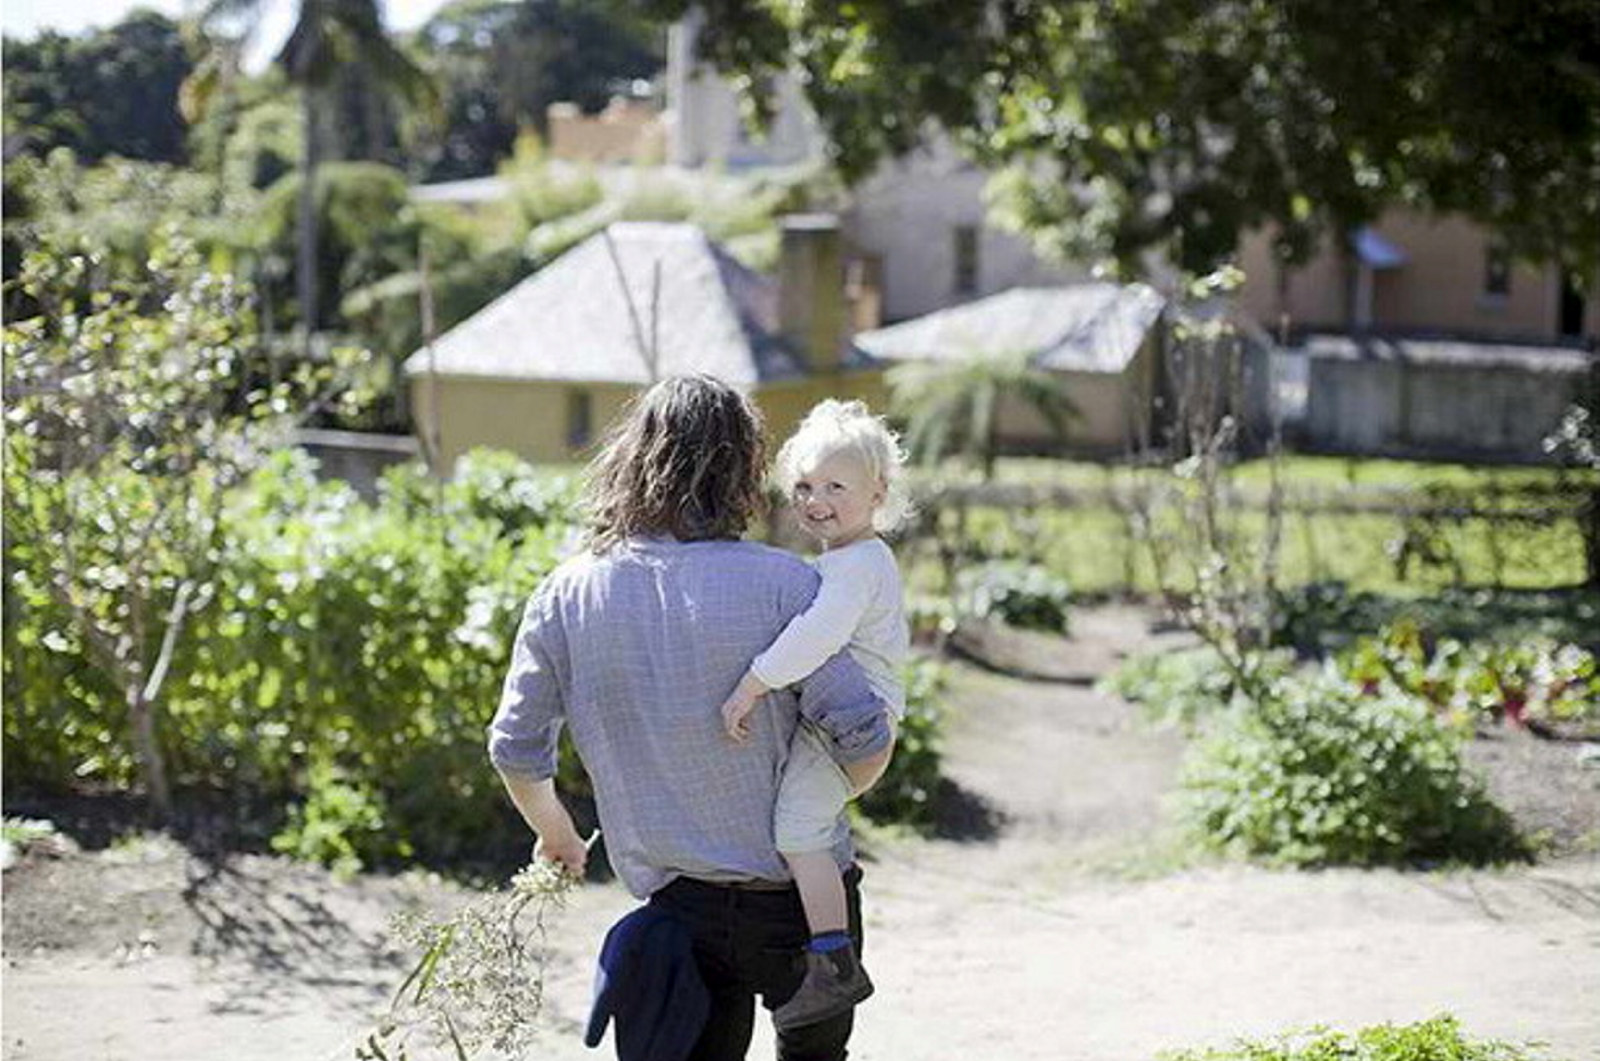 Man holding small child in garden facing away from camera with house in background.